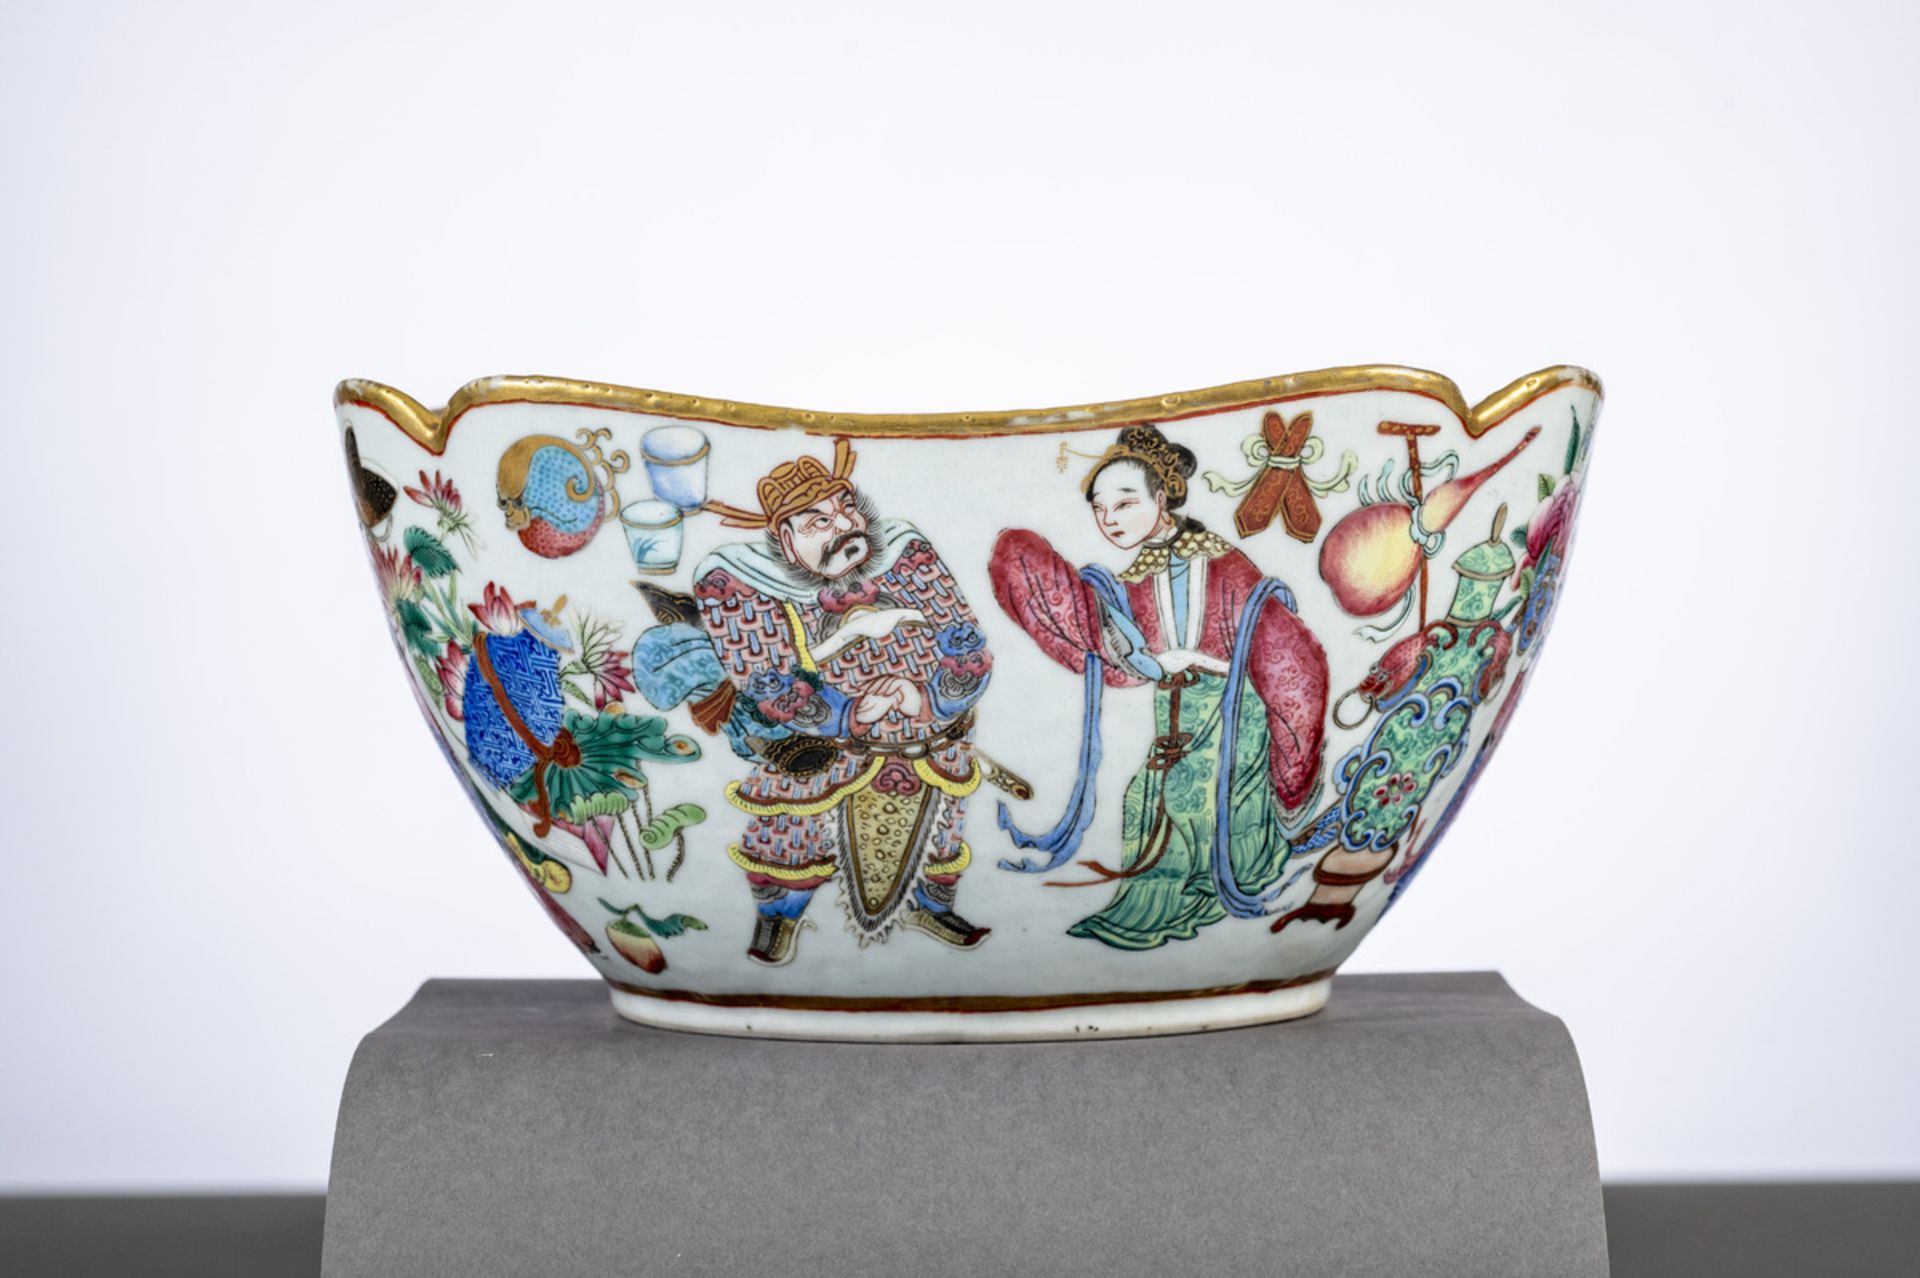 Lobed bowl in Chinese famille rose porcelain with gold rims 'characters', 19th century (11x24x24cm)